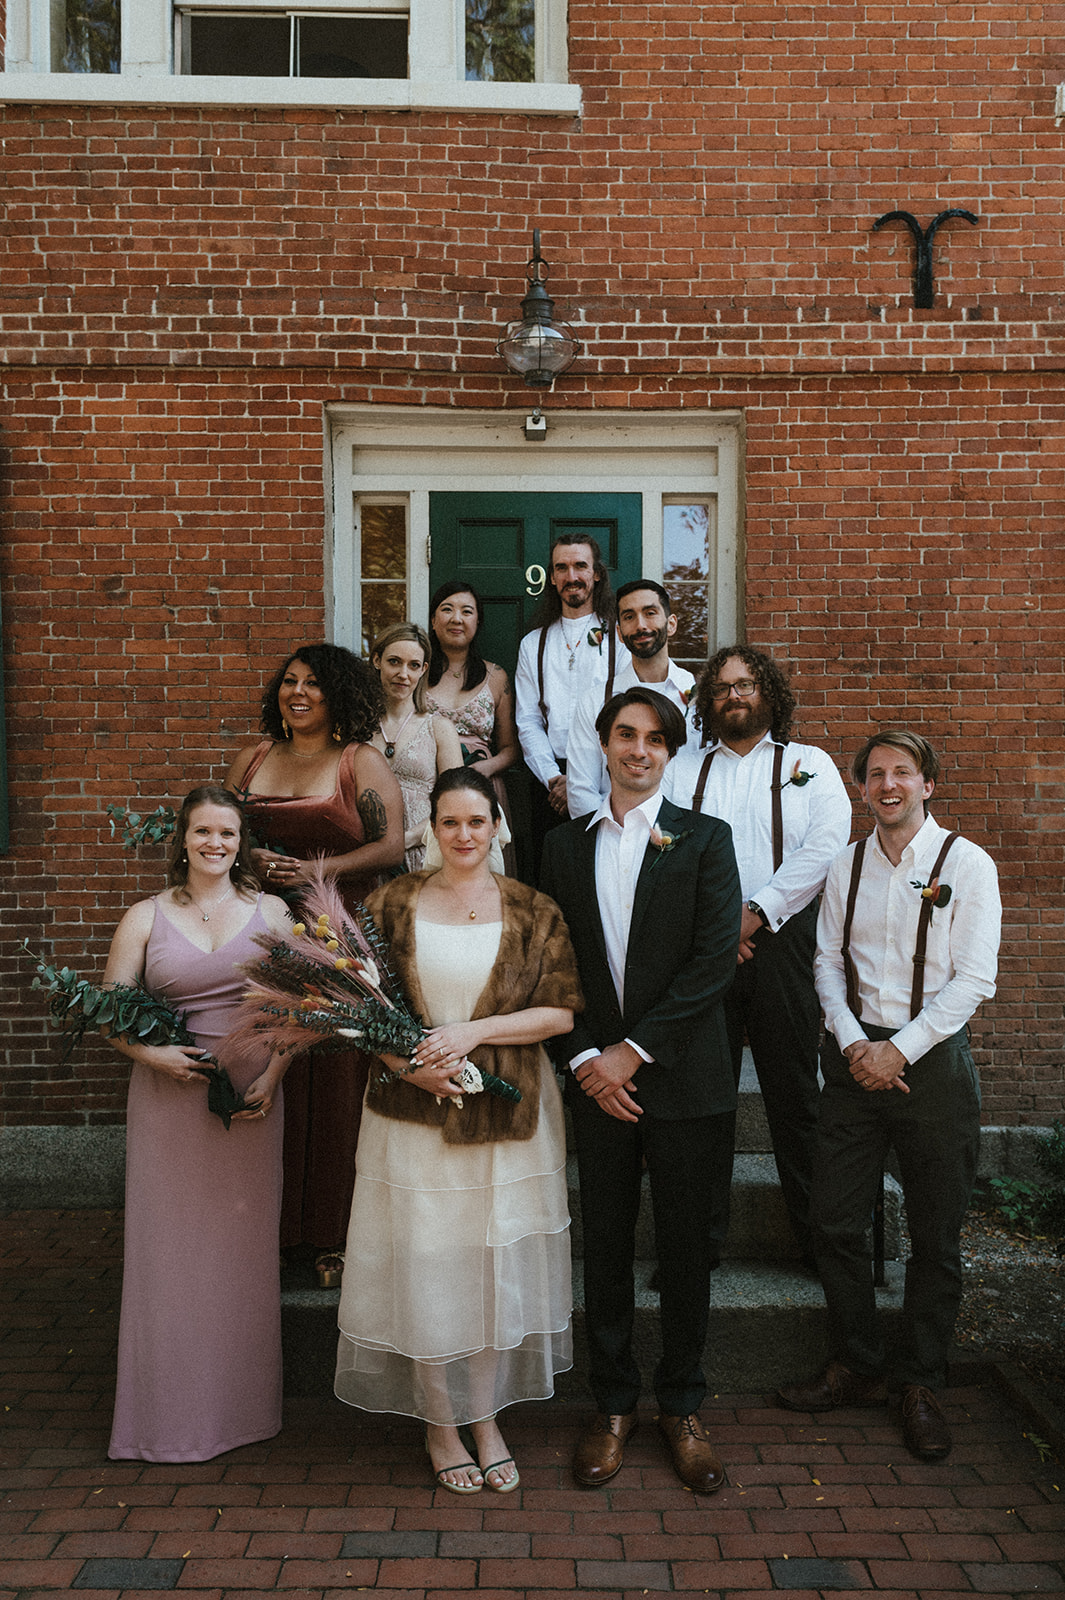 Wedding party pose with bride and groom for portraits at their Wes Anderson inspired wedding at Hamilton Hall in Salem